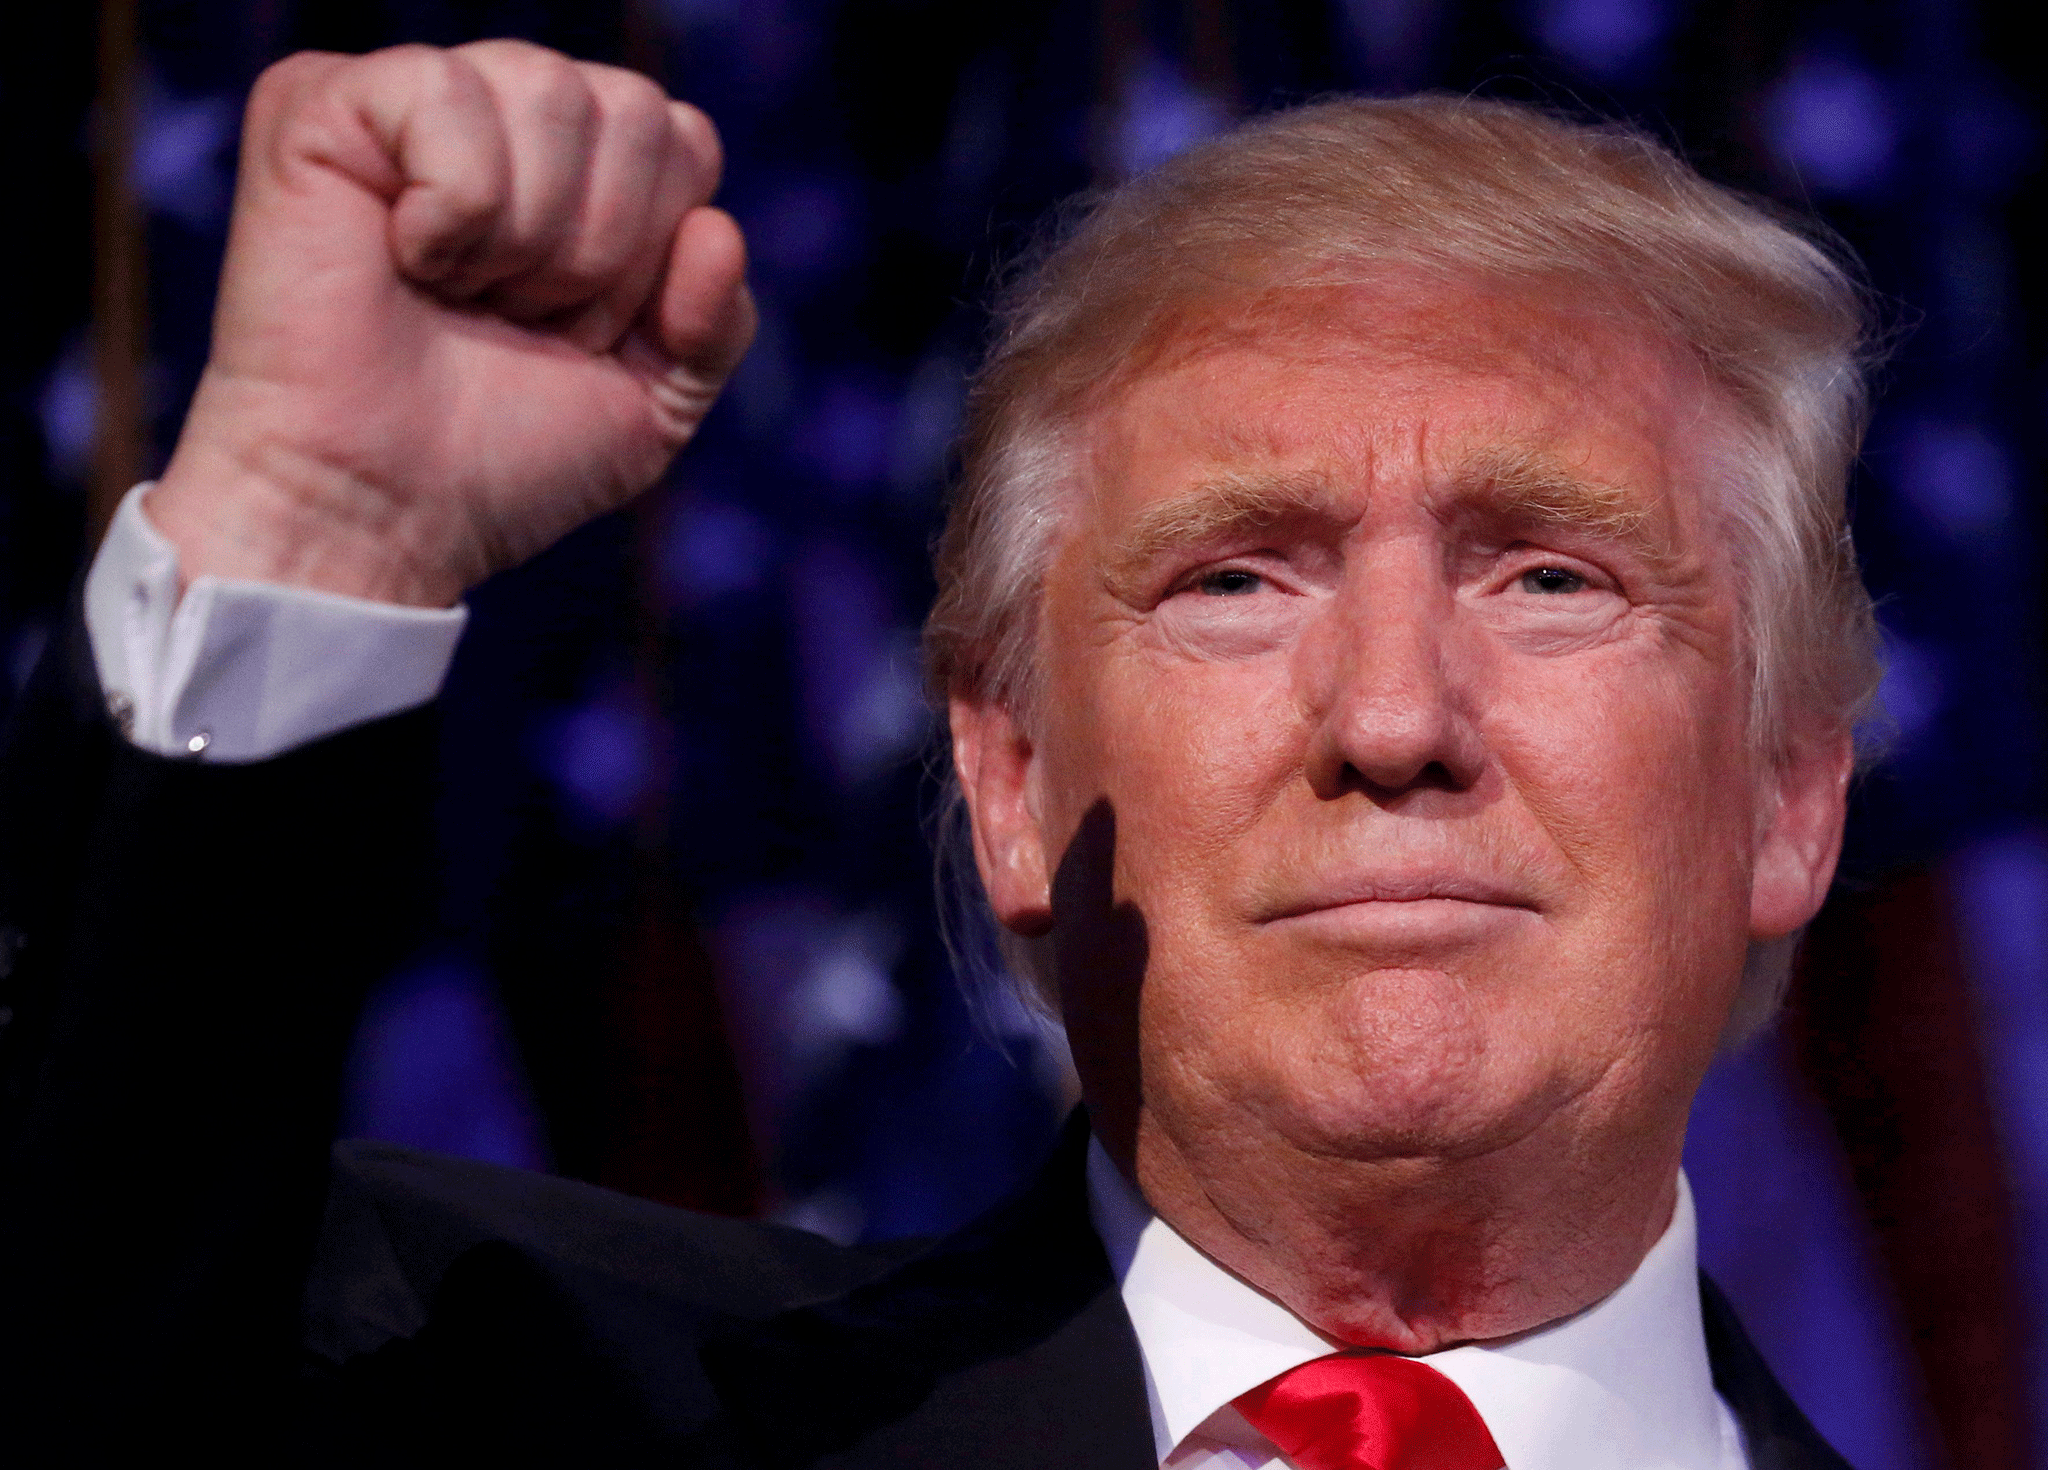 Donald Trump will become the 45th President of the United States